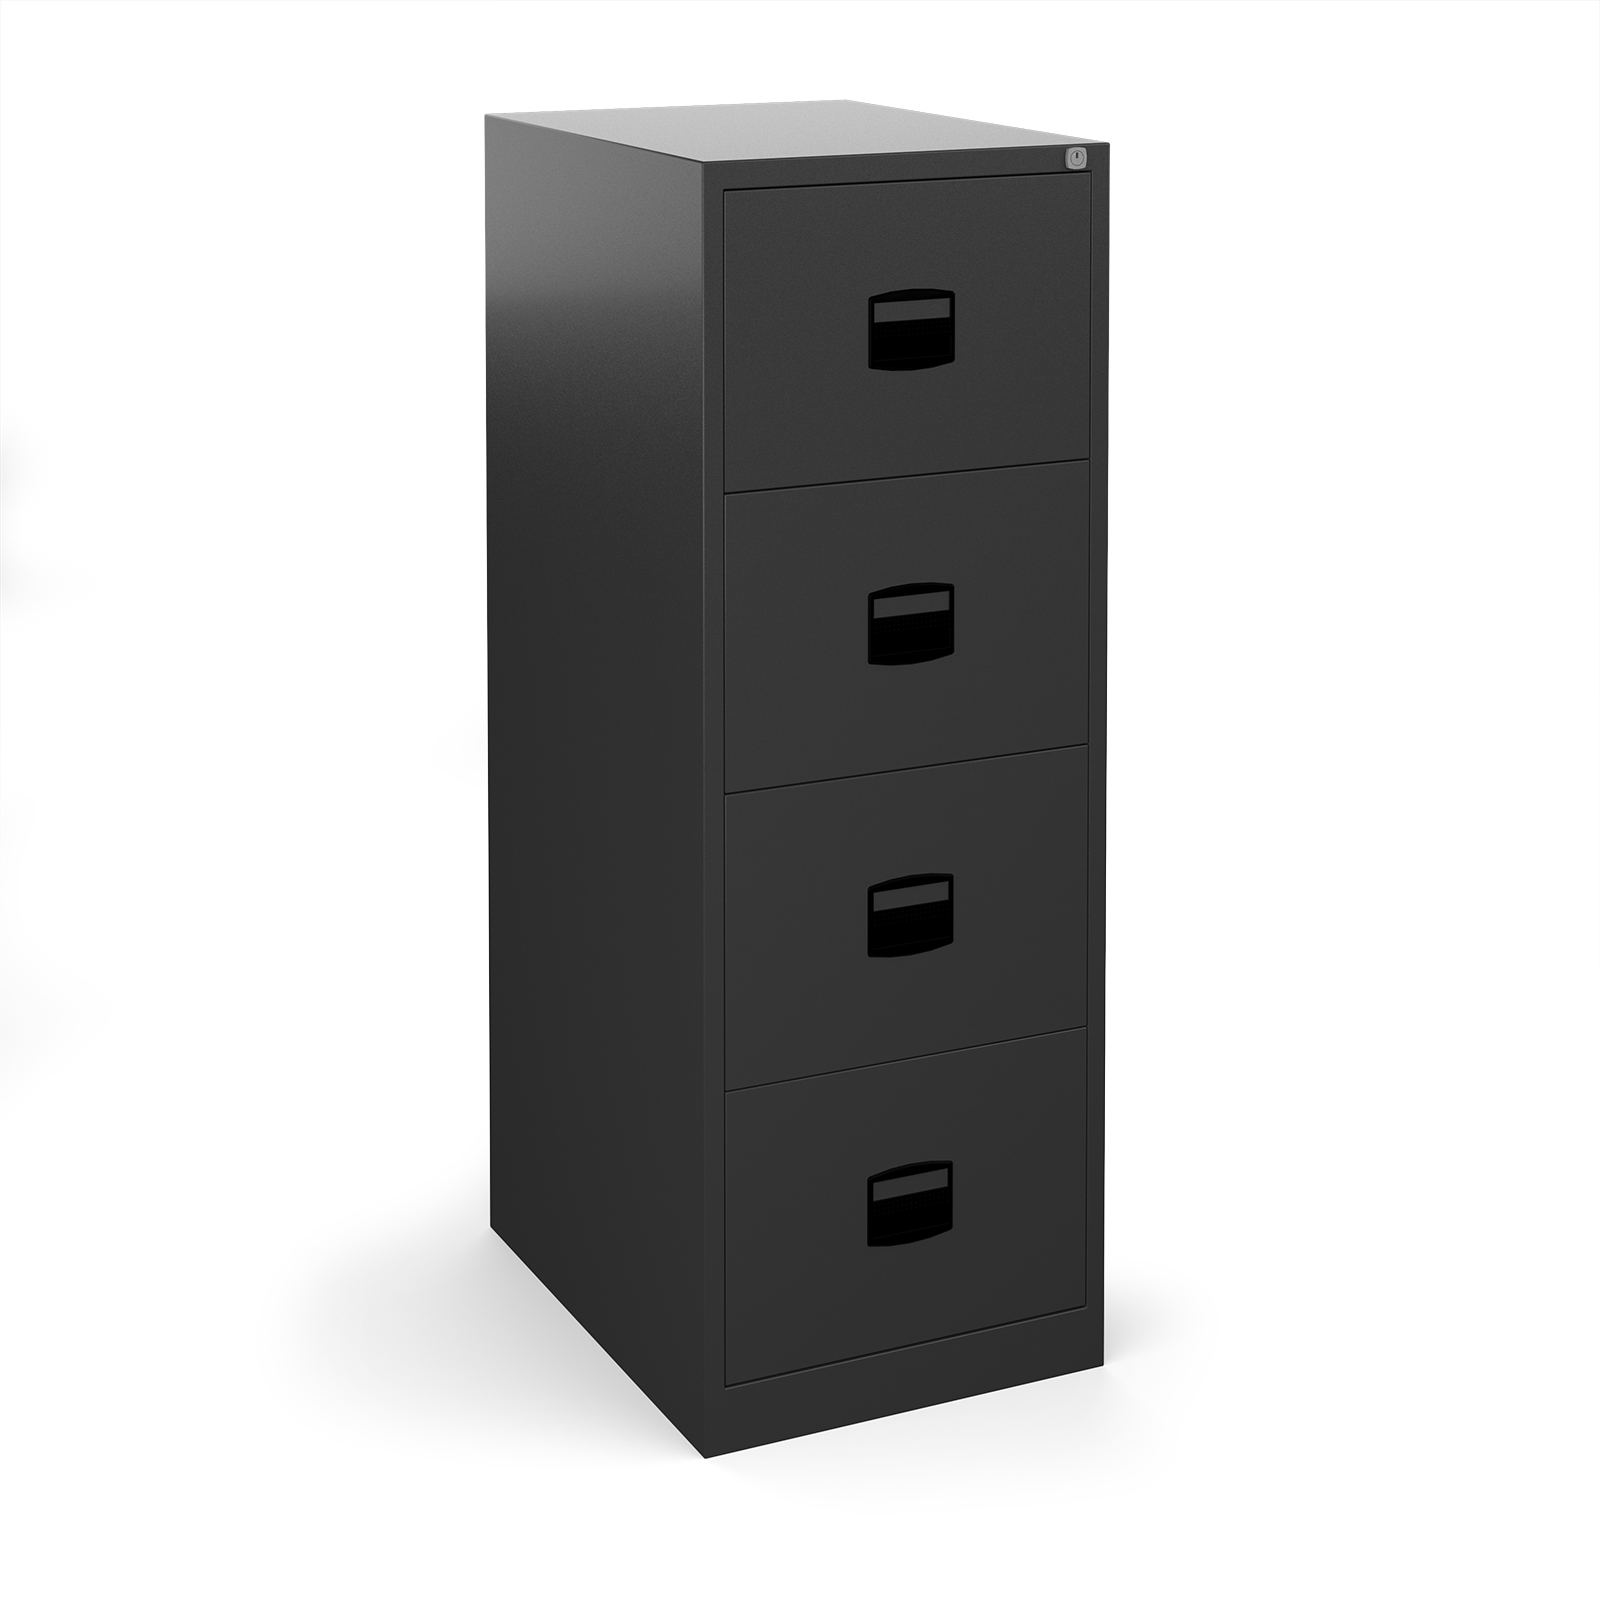 Steel Steel 4 drawer contract filing cabinet 1321mm high - black